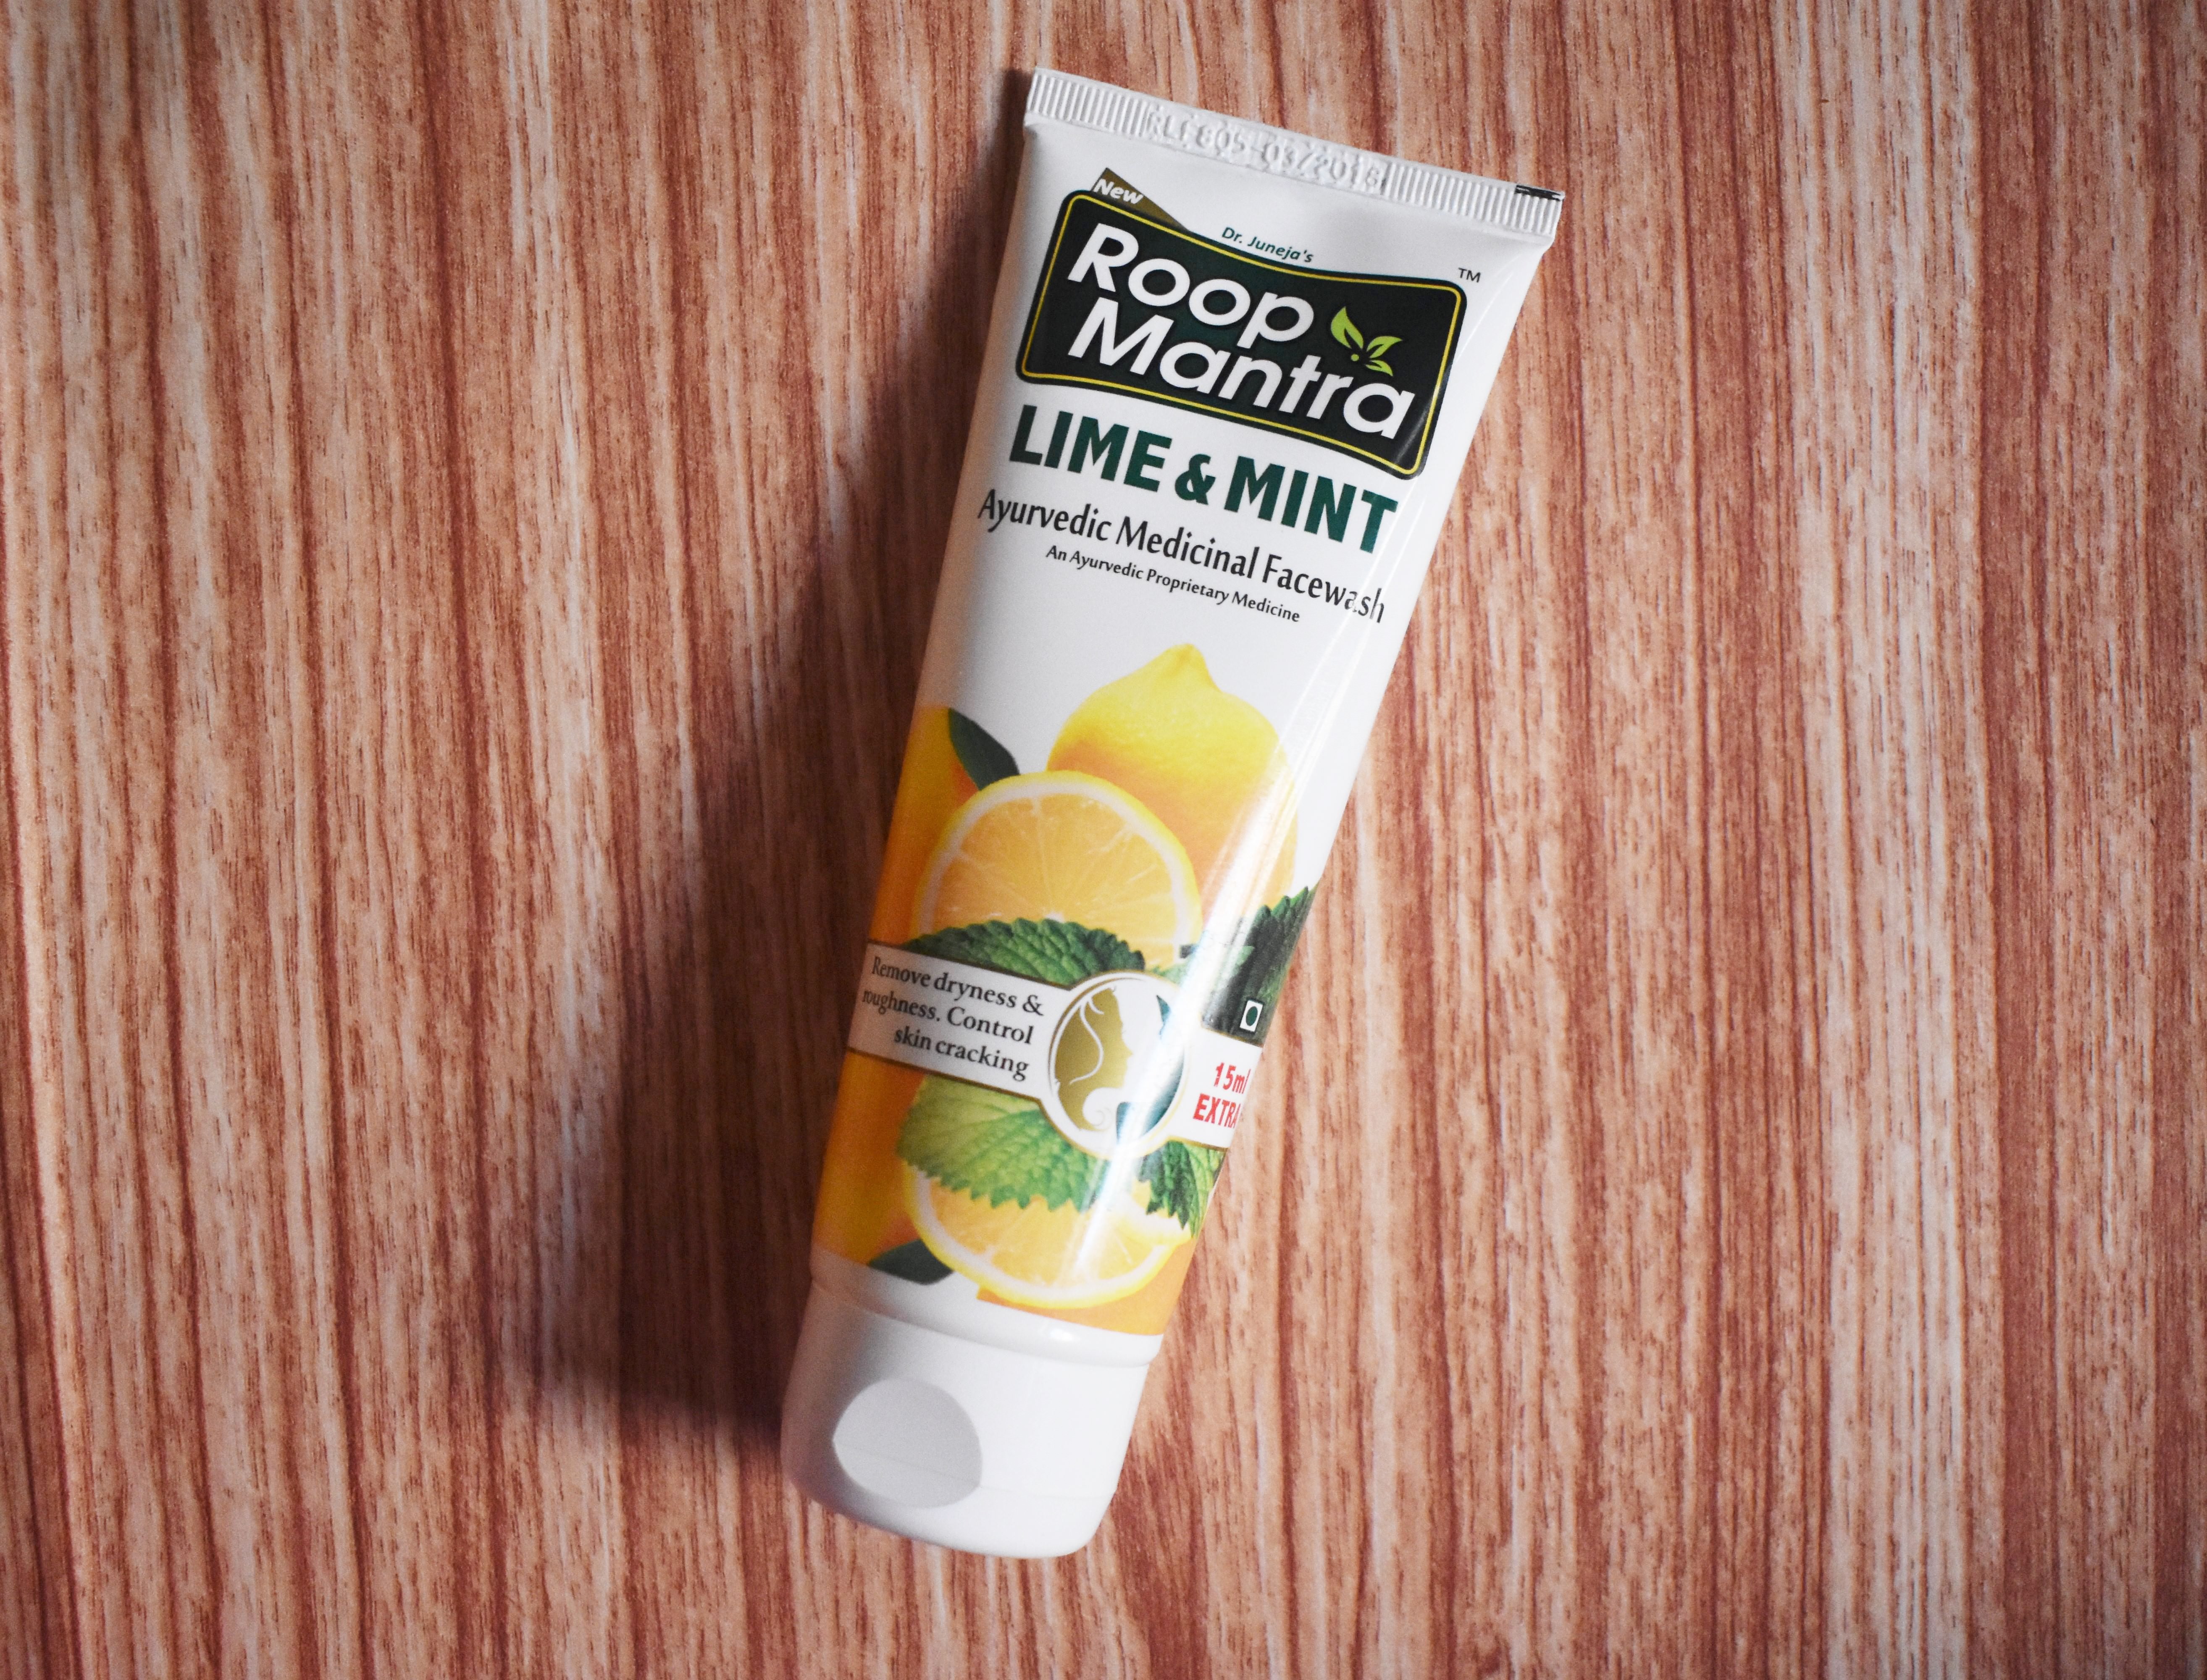 Roop Mantra Ayurvedic Medicinal Face Wash Review lime & mint